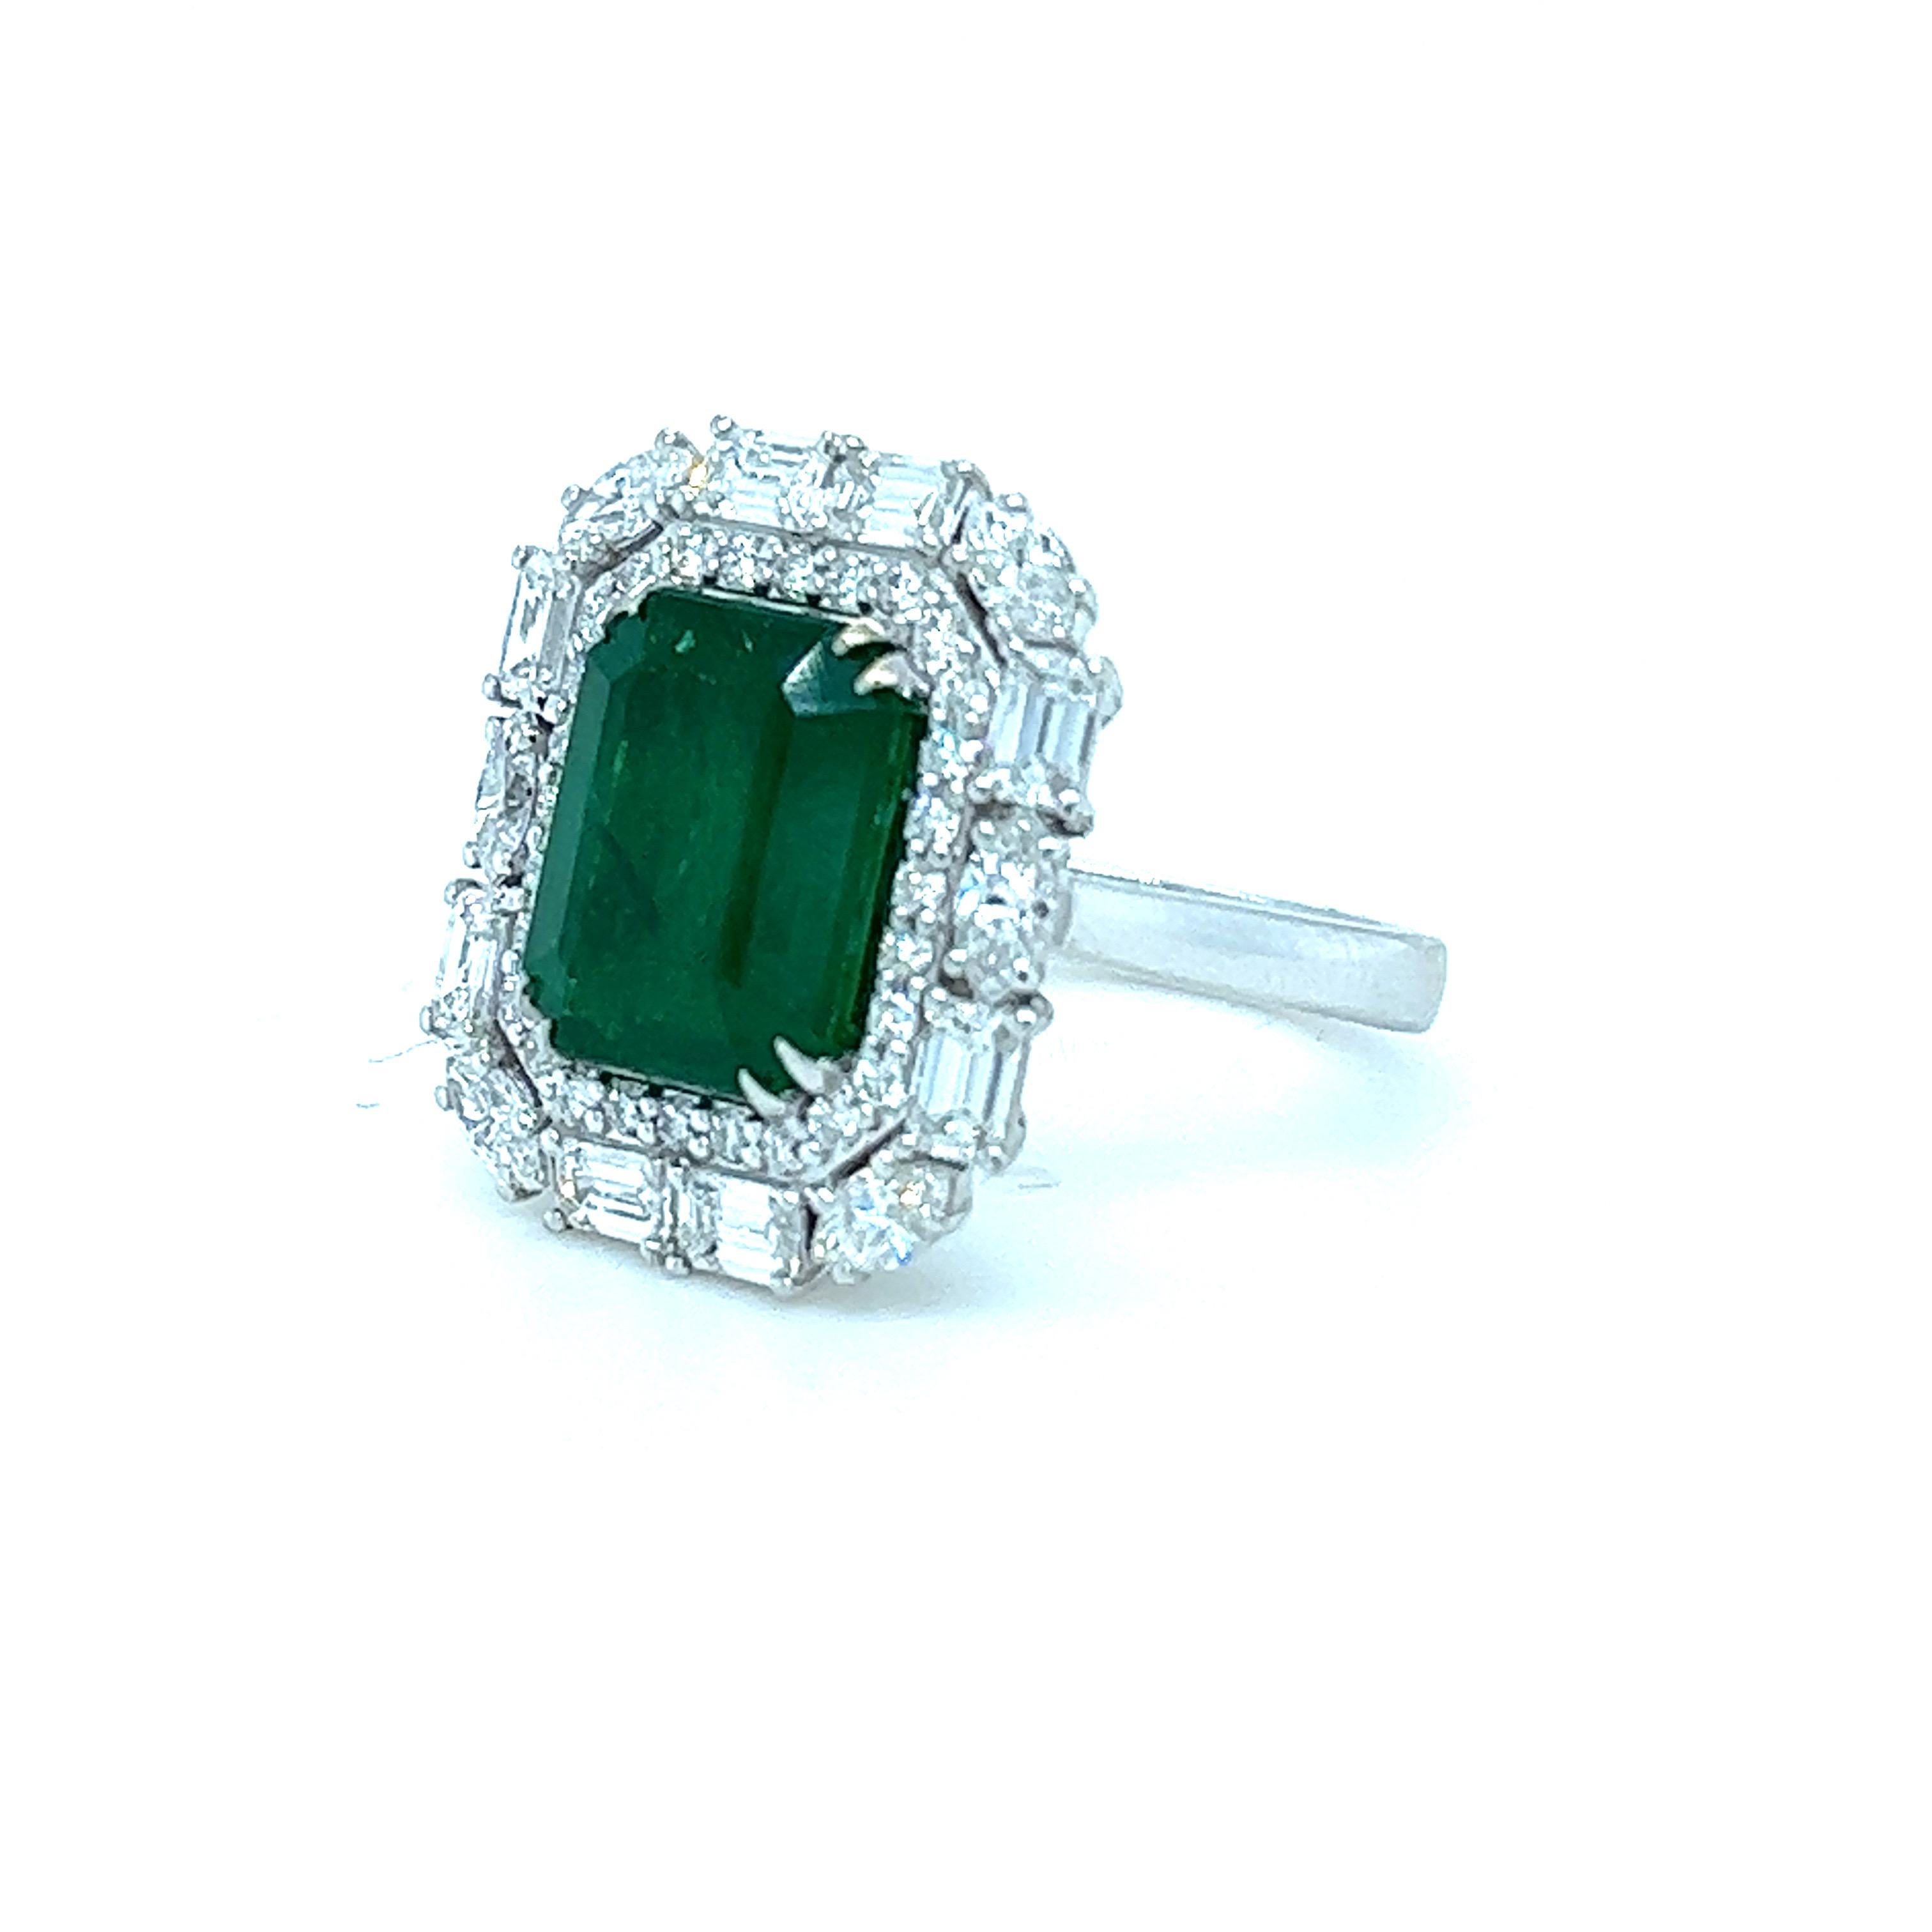 GRS Certified 4.44 Carat Emerald Cocktail Ring
 
DETAILS :

✦Gemstone : Emerald GRS Certified
✦ Type : Natural and Minor
✦ Shape : Emerald Cut
✦  Emerald Weight : 4.44 Cts
✦ Diamonds Vs F/G

Marquise : 0.52 Cts
Emerald : 0.96 Cts
Rounds : 0.28 Cts
✦